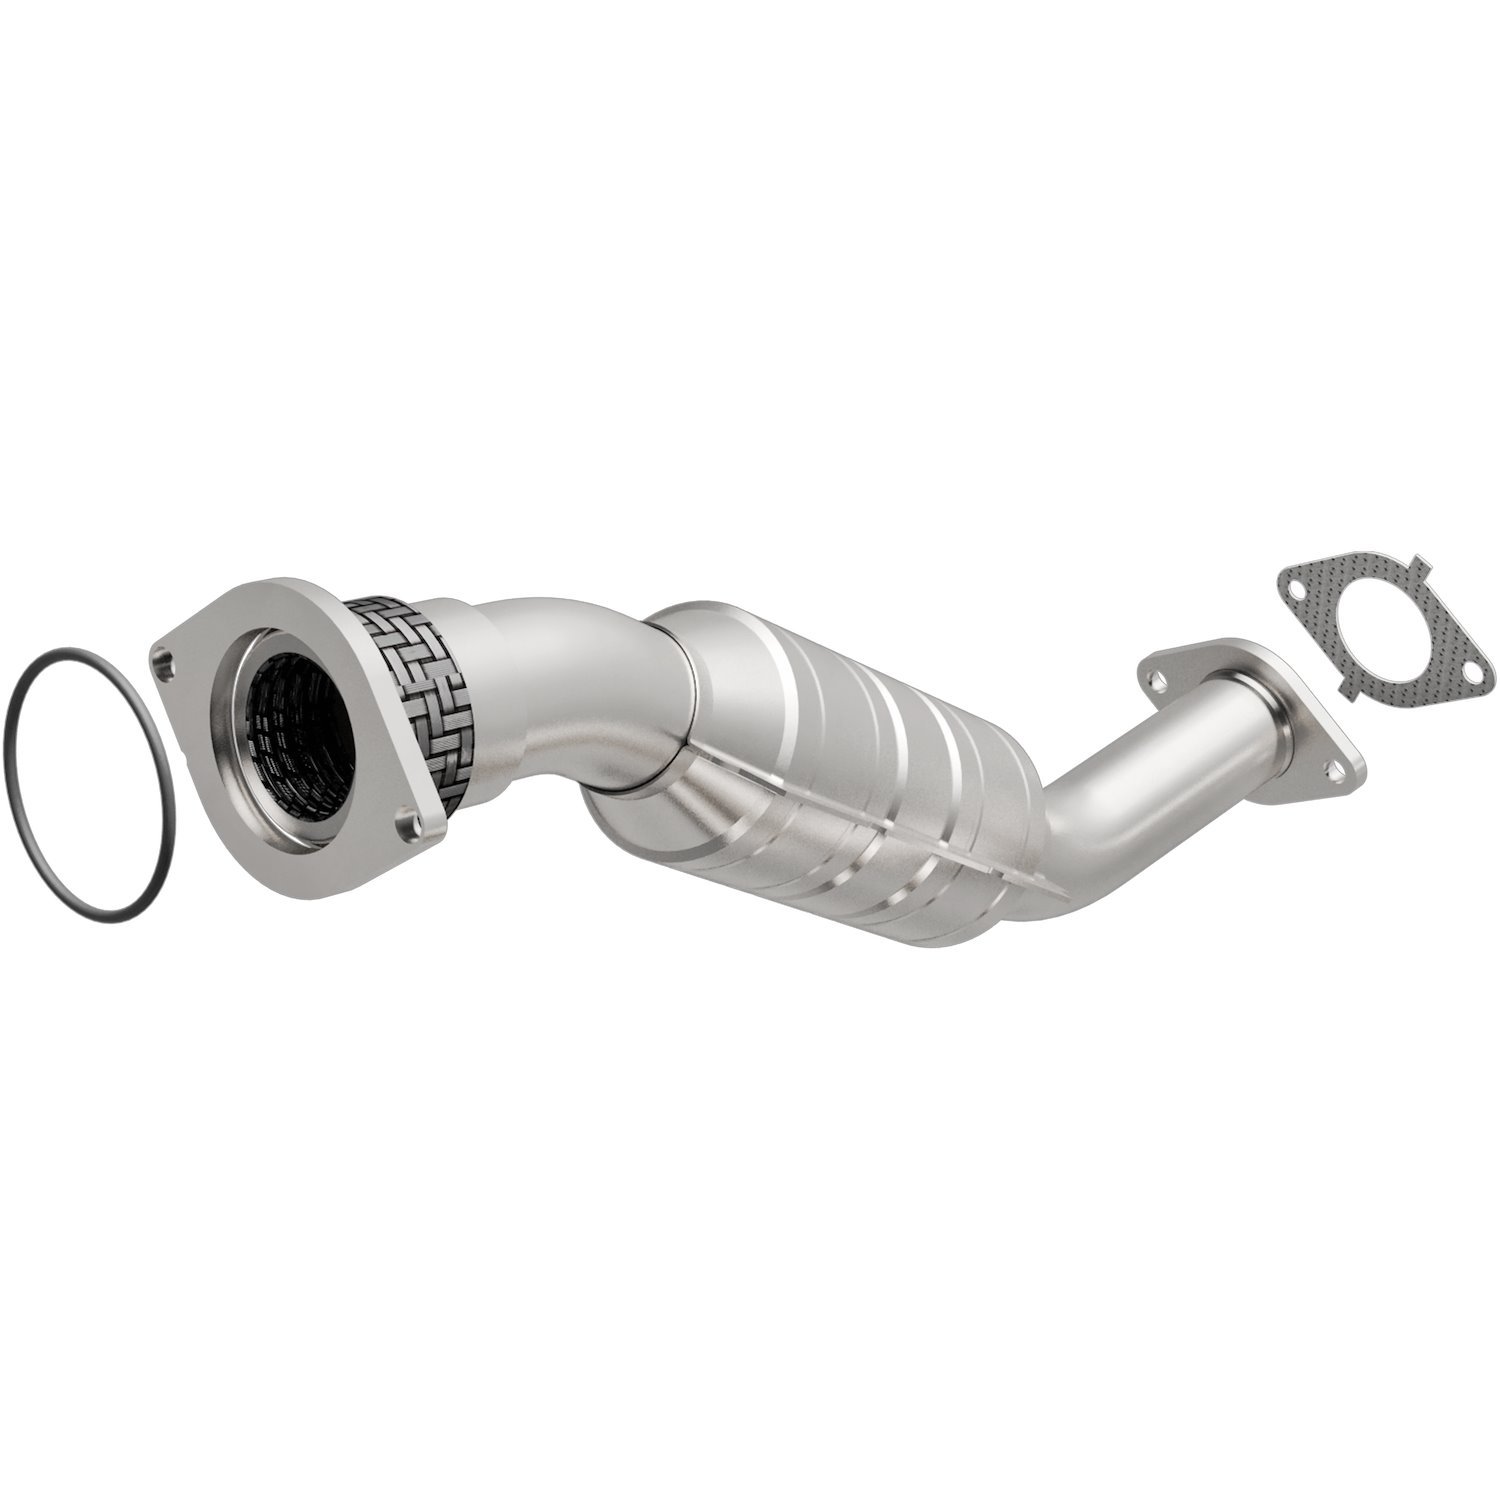 2008 Buick Lucerne OEM Grade Federal / EPA Compliant Direct-Fit Catalytic Converter